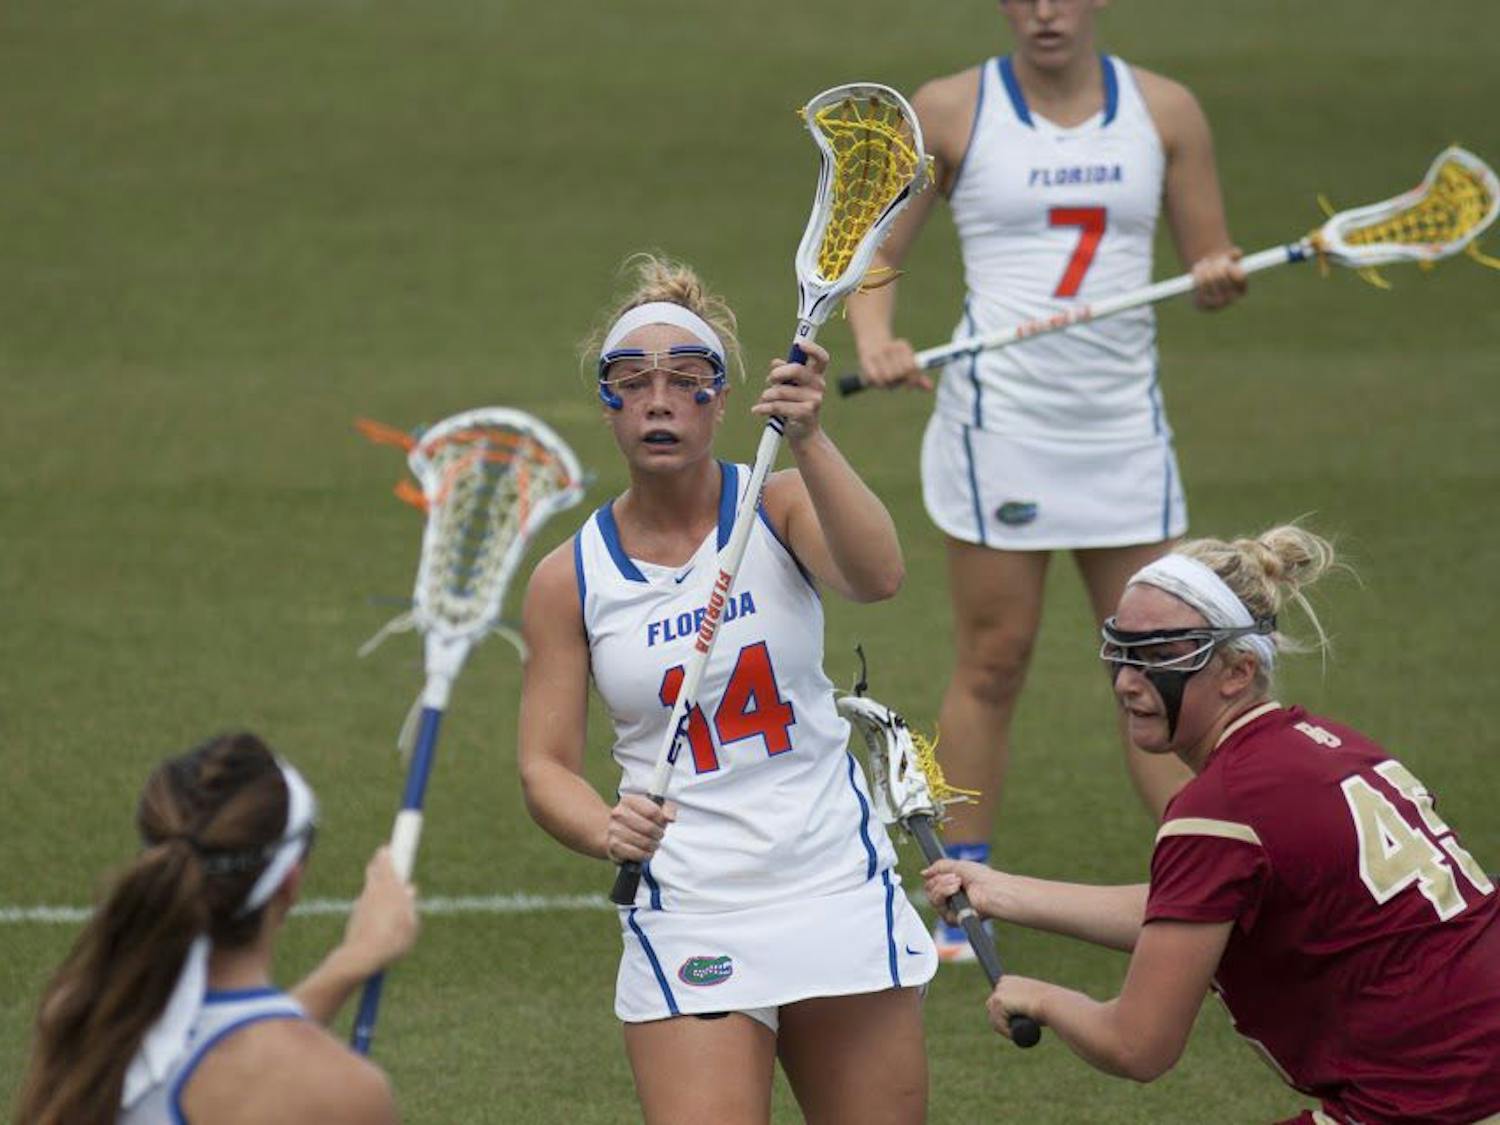 UF attacker Lindsey Ronbeck holds her stick up during Florida's 15-8 win against Denver on March 25, 2017, at Donald R. Dizney Stadium.